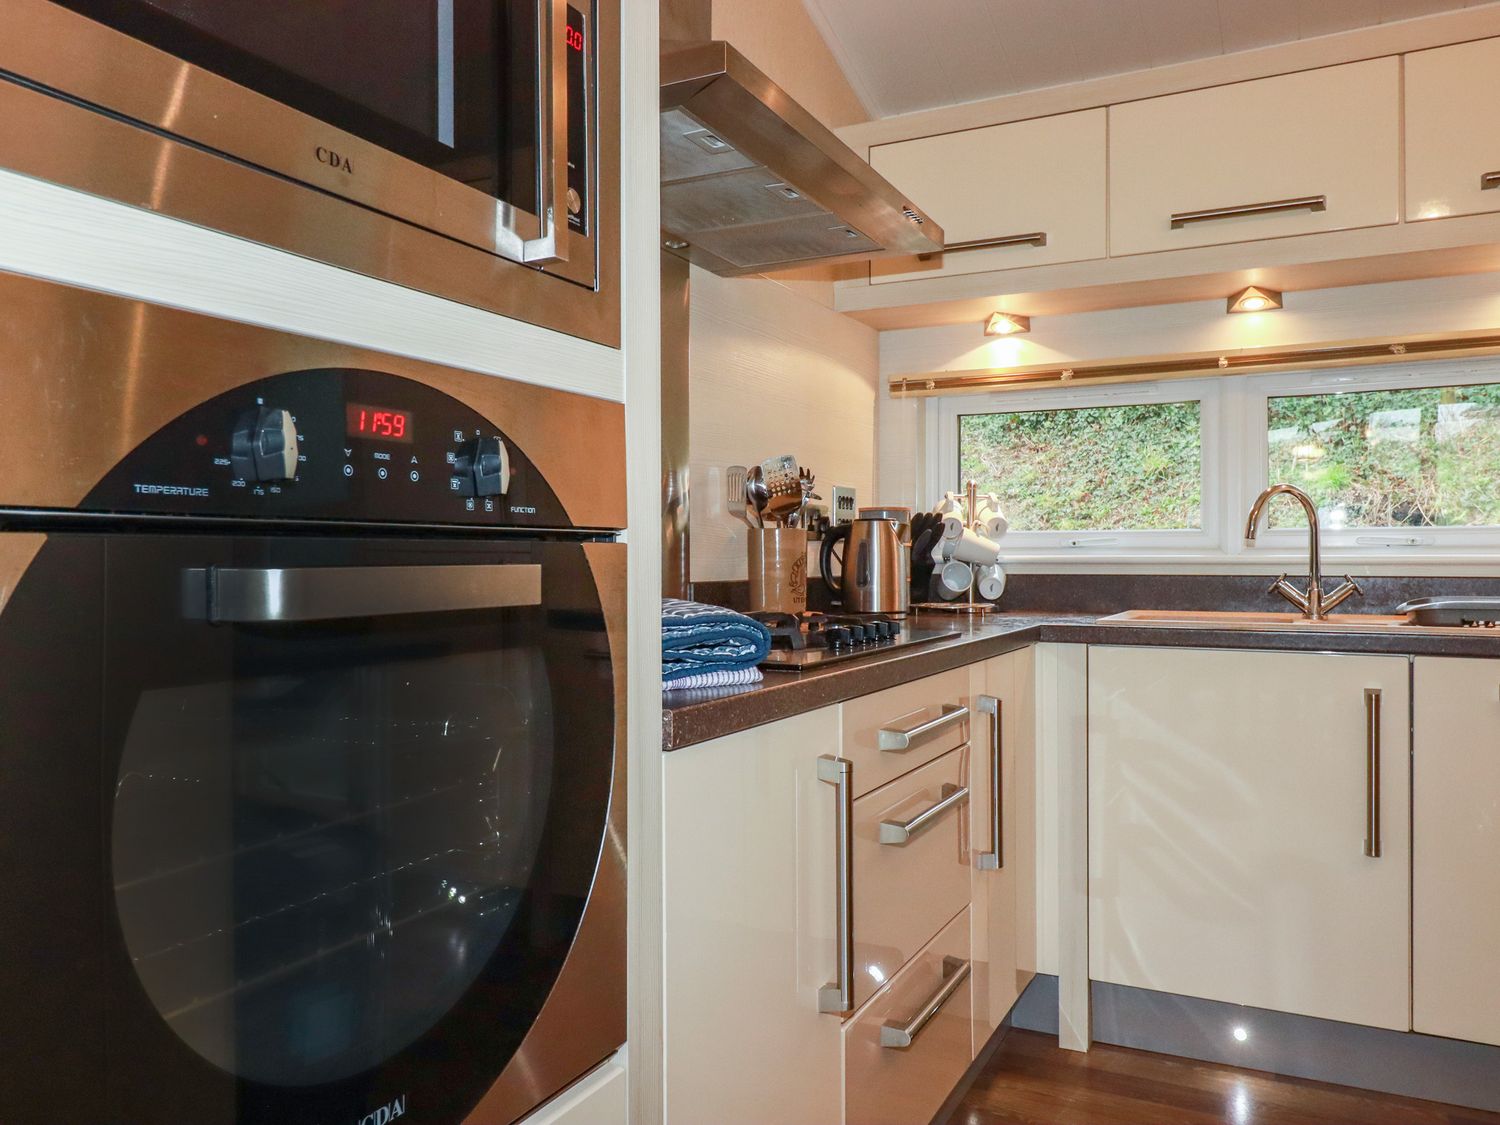 25 Bossiney Bay, near Tintagel, Cornwall. Two-bedroom lodge with rural views and hot tub. Open-plan.